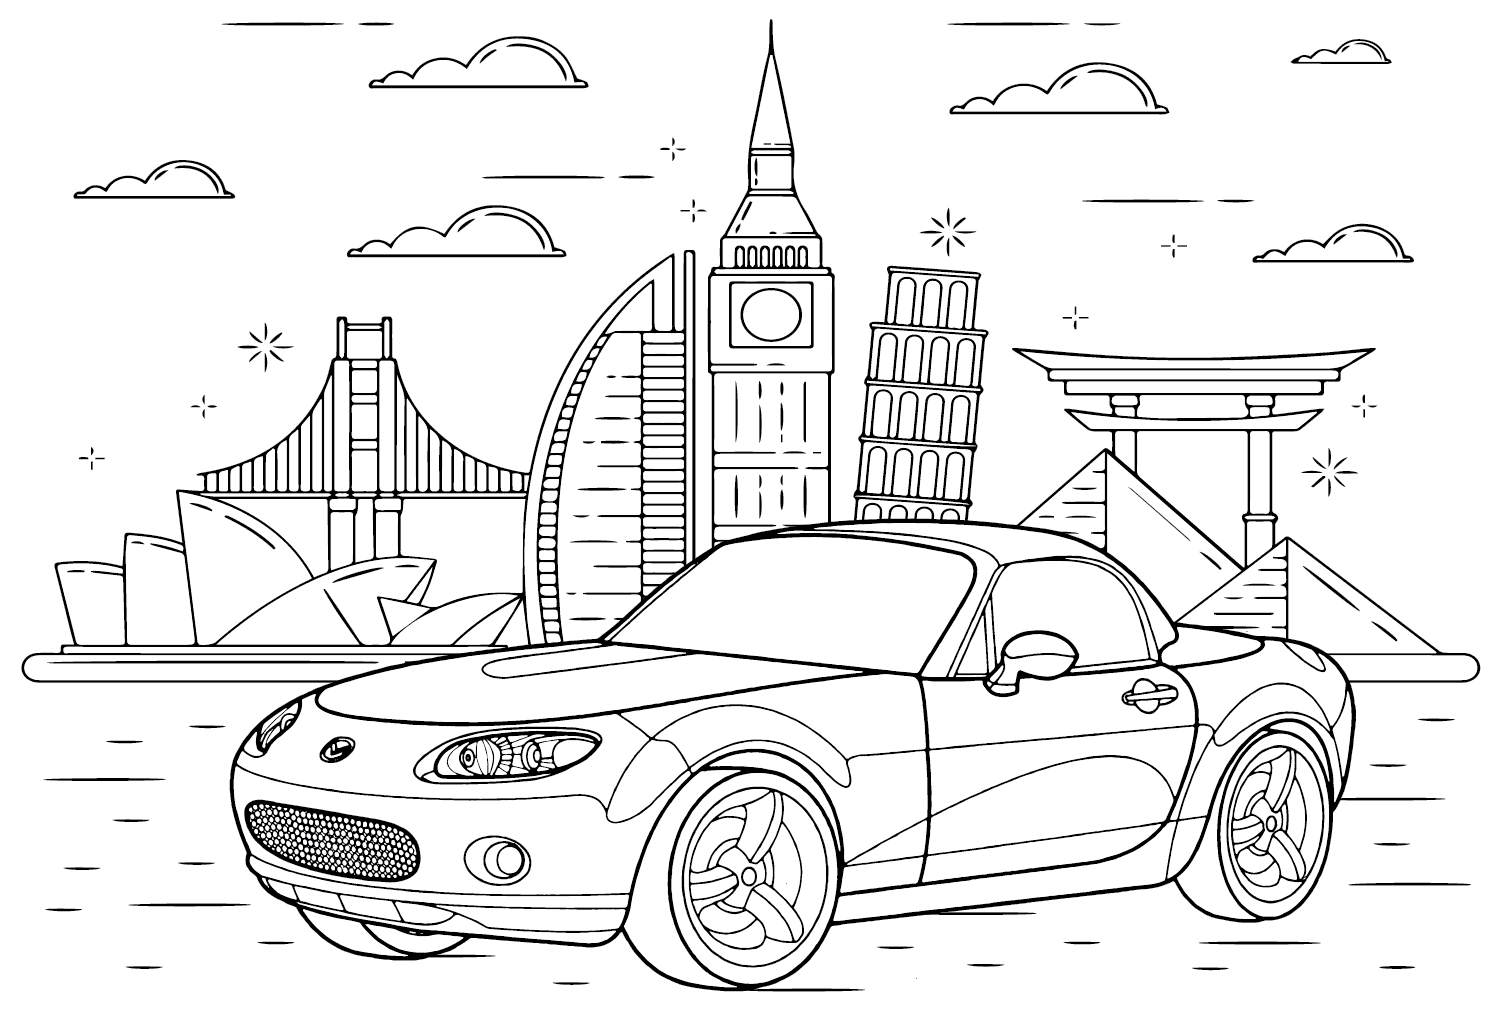 Mazda MX-5 Coloring Page Images from Mazda